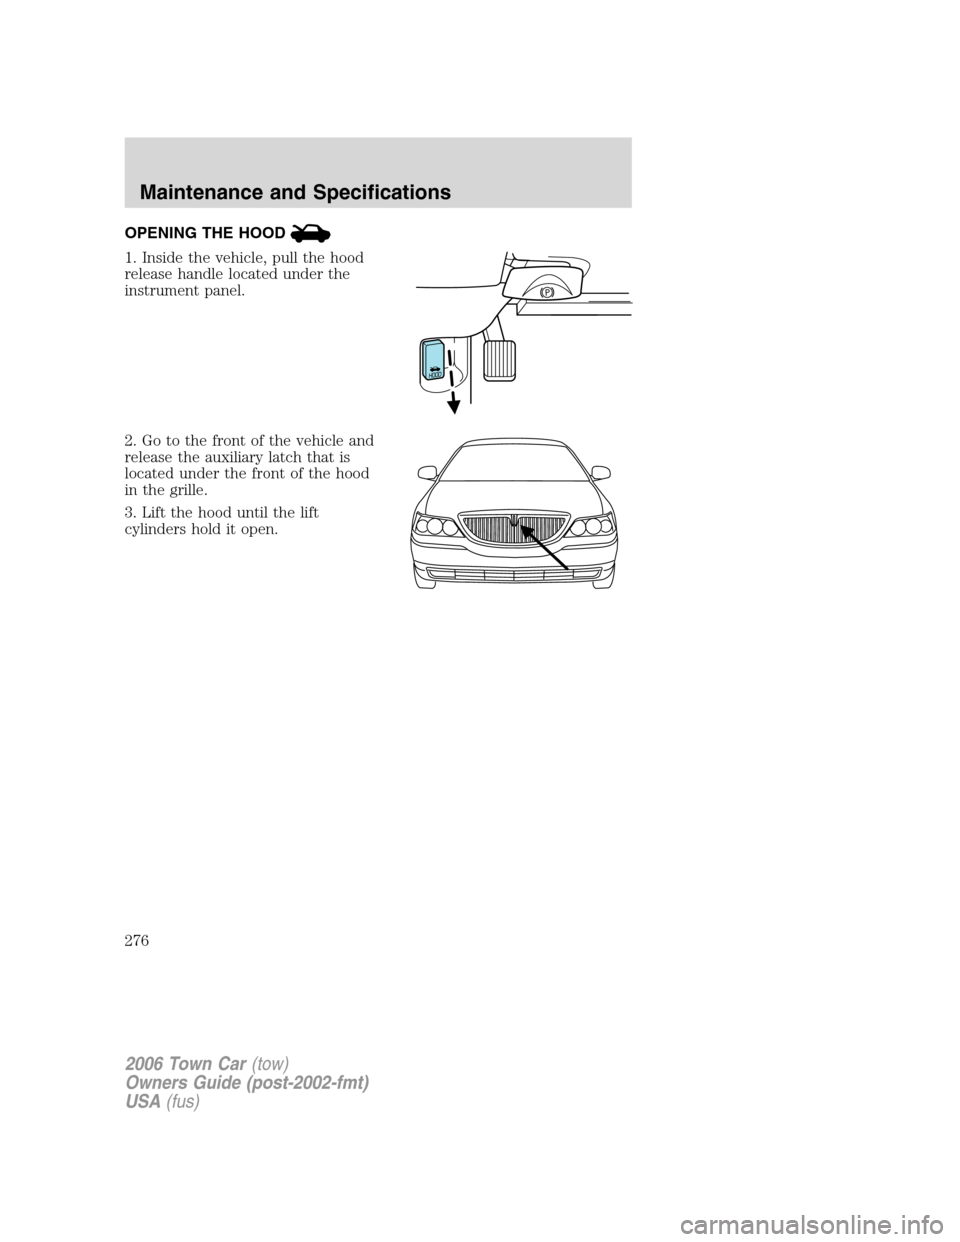 LINCOLN TOWN CAR 2006  Owners Manual OPENING THE HOOD
1. Inside the vehicle, pull the hood
release handle located under the
instrument panel.
2. Go to the front of the vehicle and
release the auxiliary latch that is
located under the fro